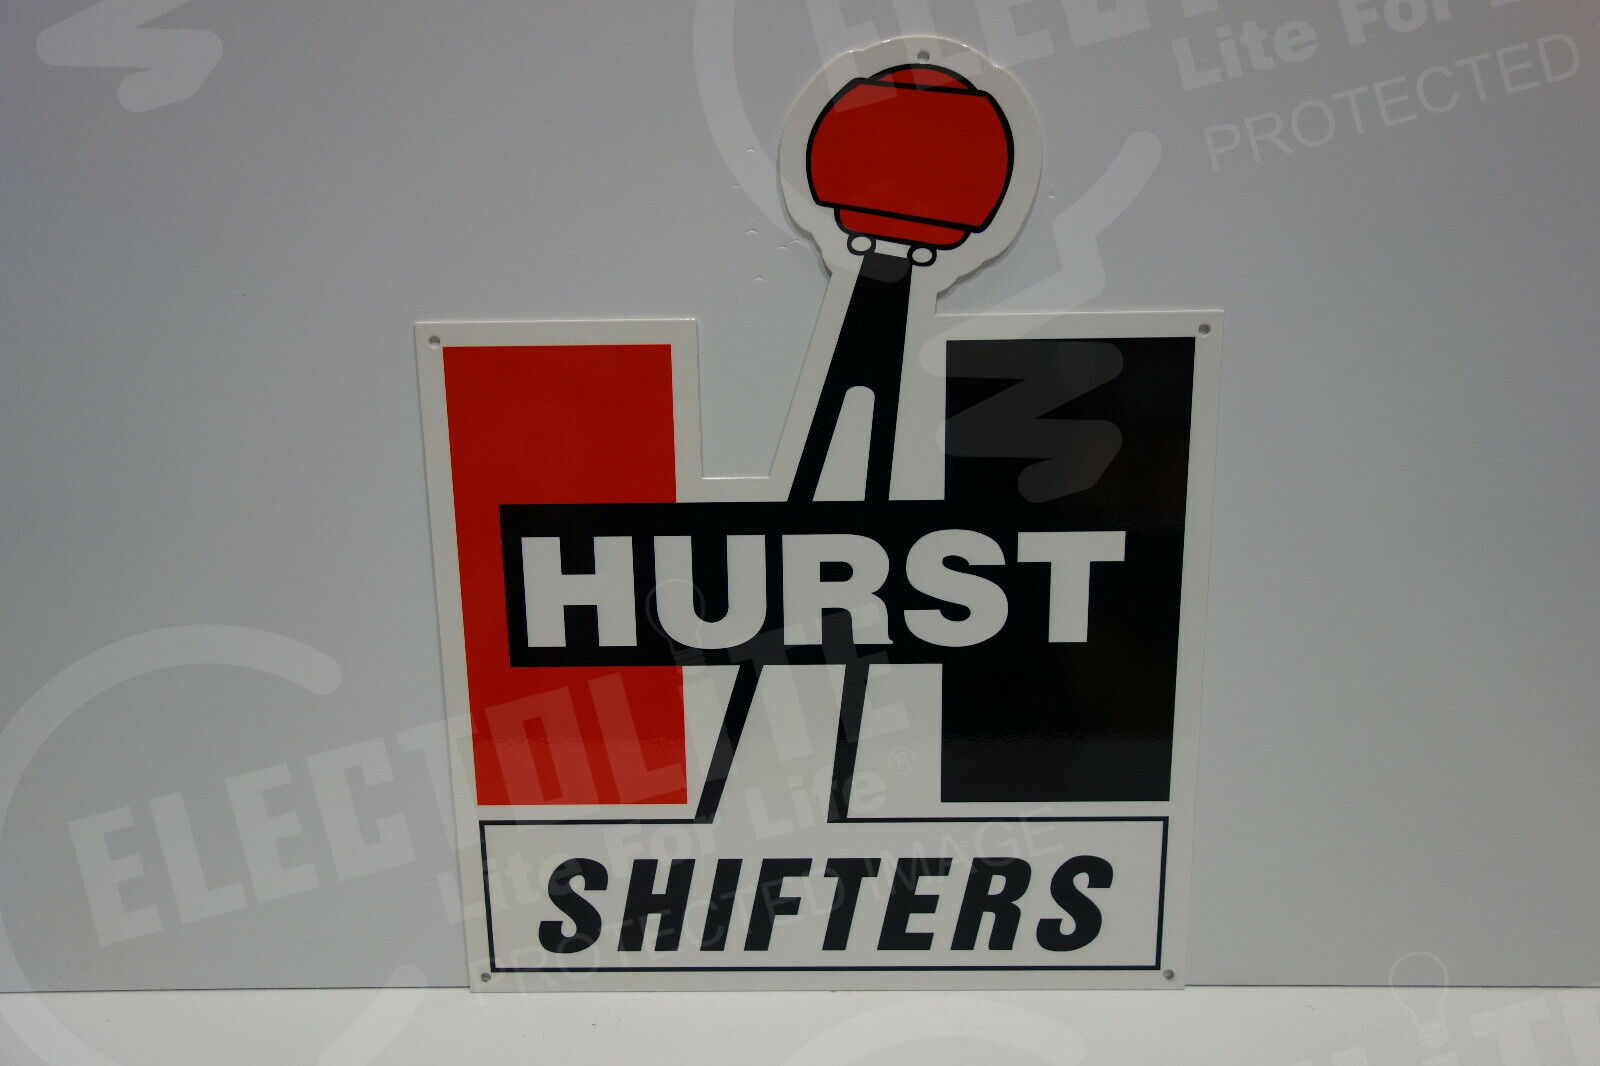 HURST SHIFTERS DEALERSHIP Enamel Sign 14 3/8 inches wide by 18 inches high